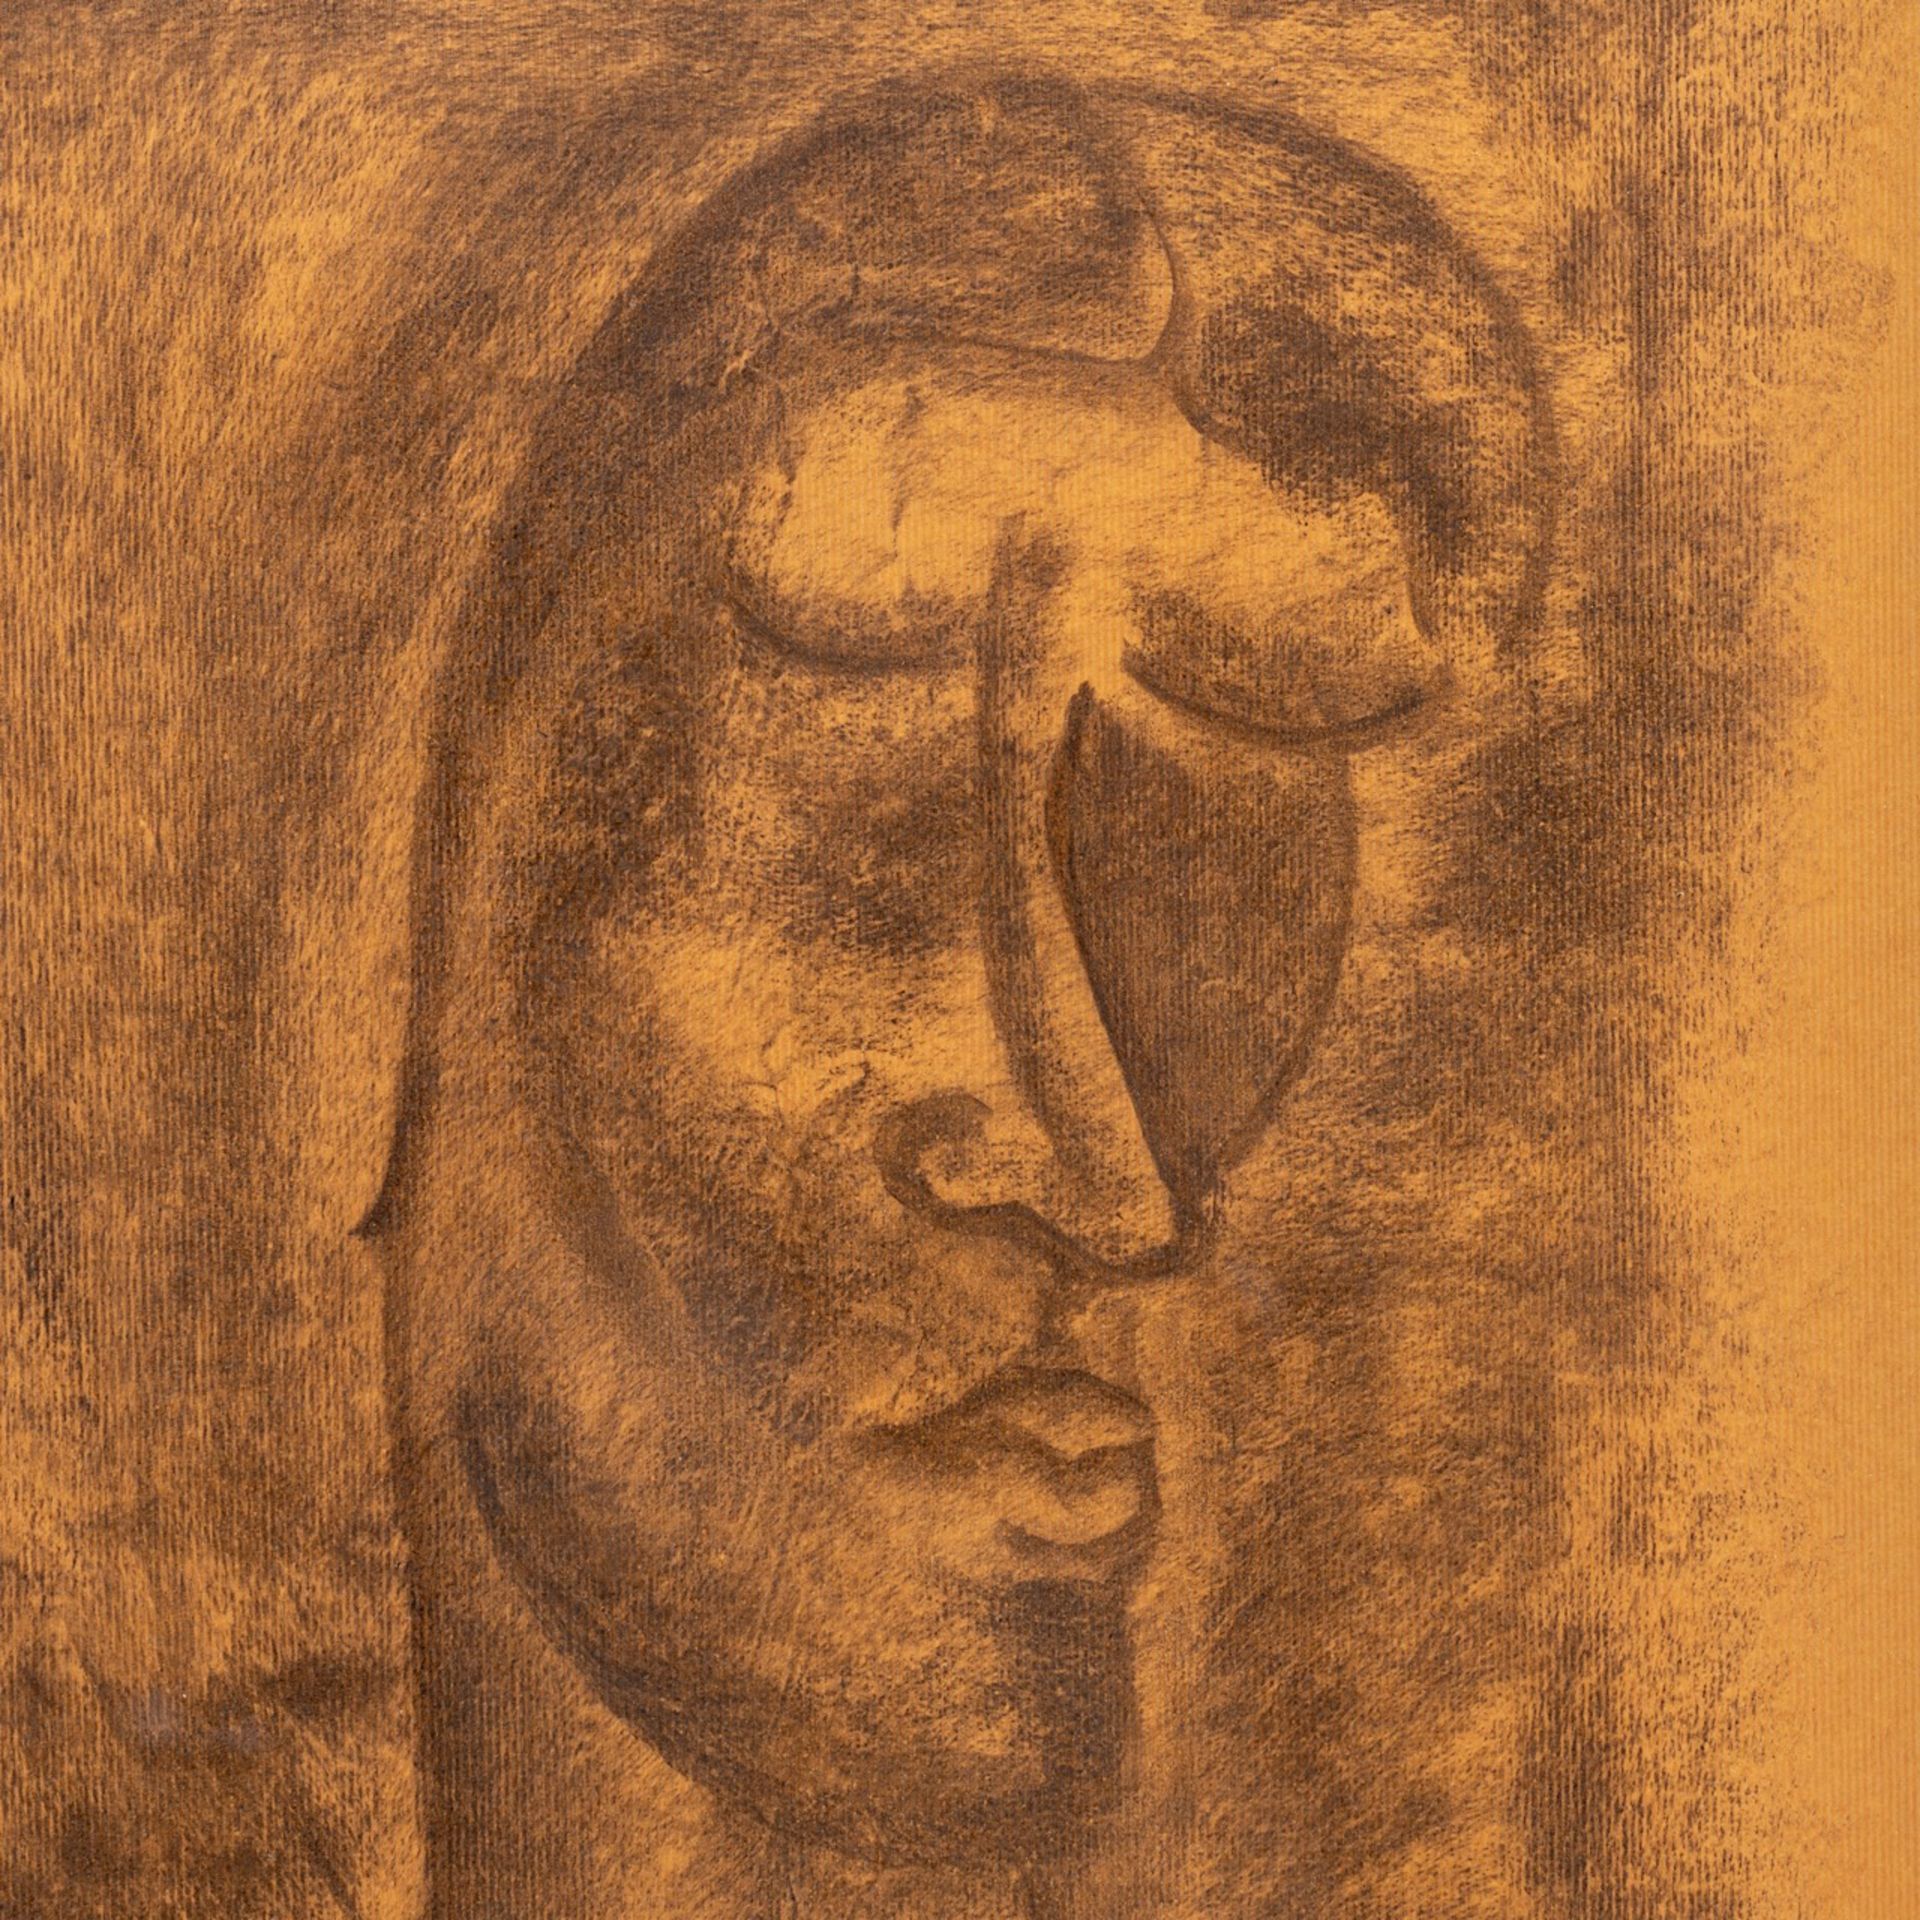 Constant Permeke (1886-1952), study of a head, charcoal drawing on paper 69 x 50 cm. (27.1 x 19.6 in - Image 5 of 5